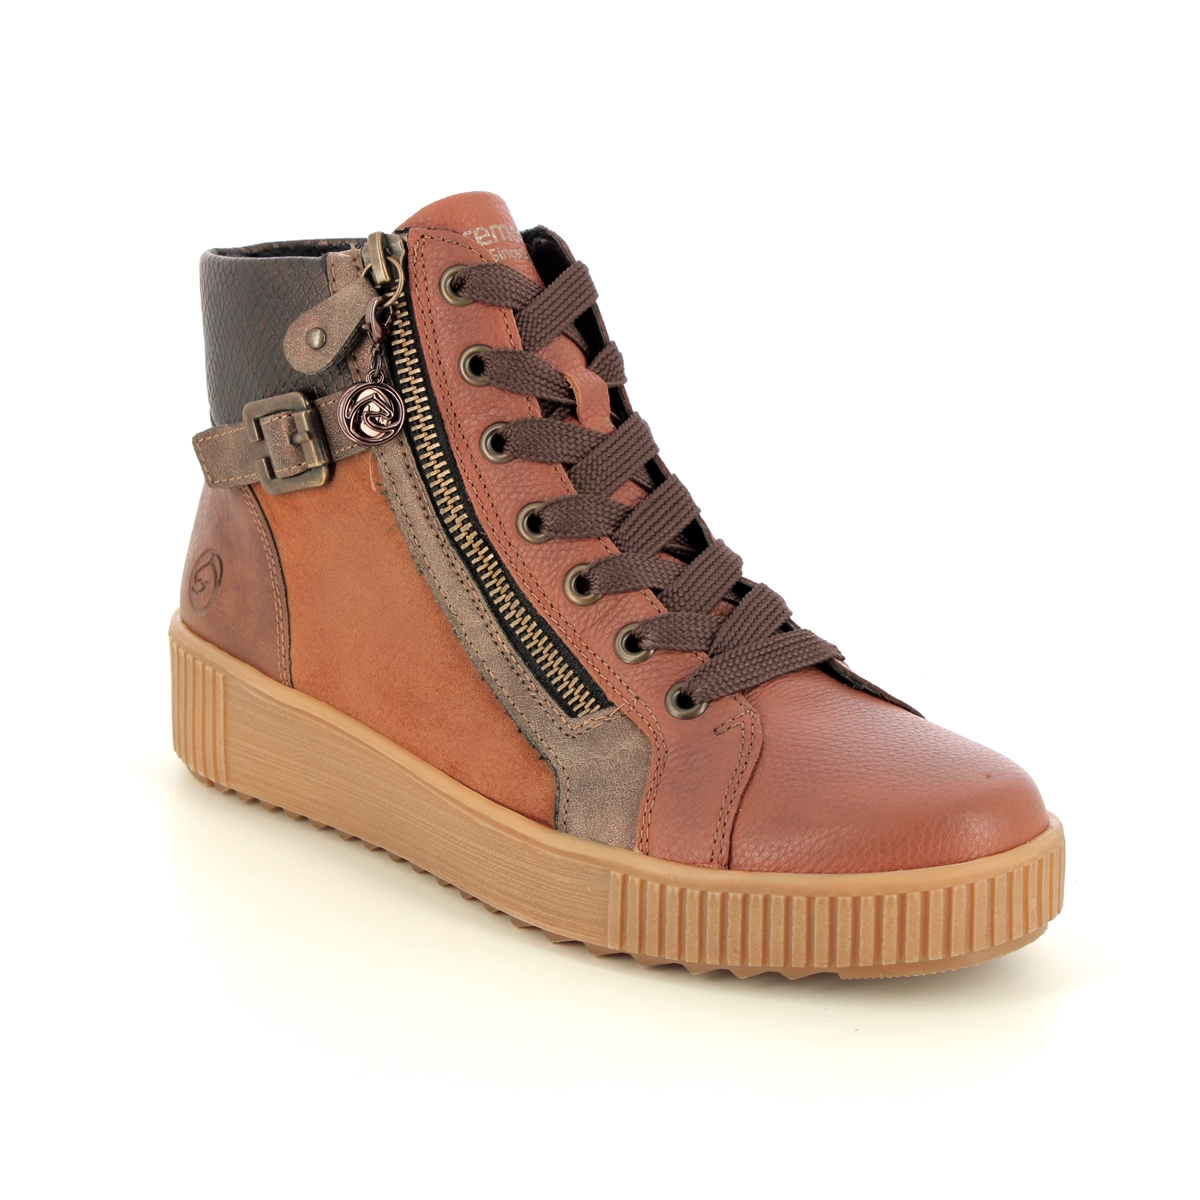 Remonte Durlozip Elle Tan Leather Womens Hi Tops R7997-24 In Size 41 In Plain Tan Leather